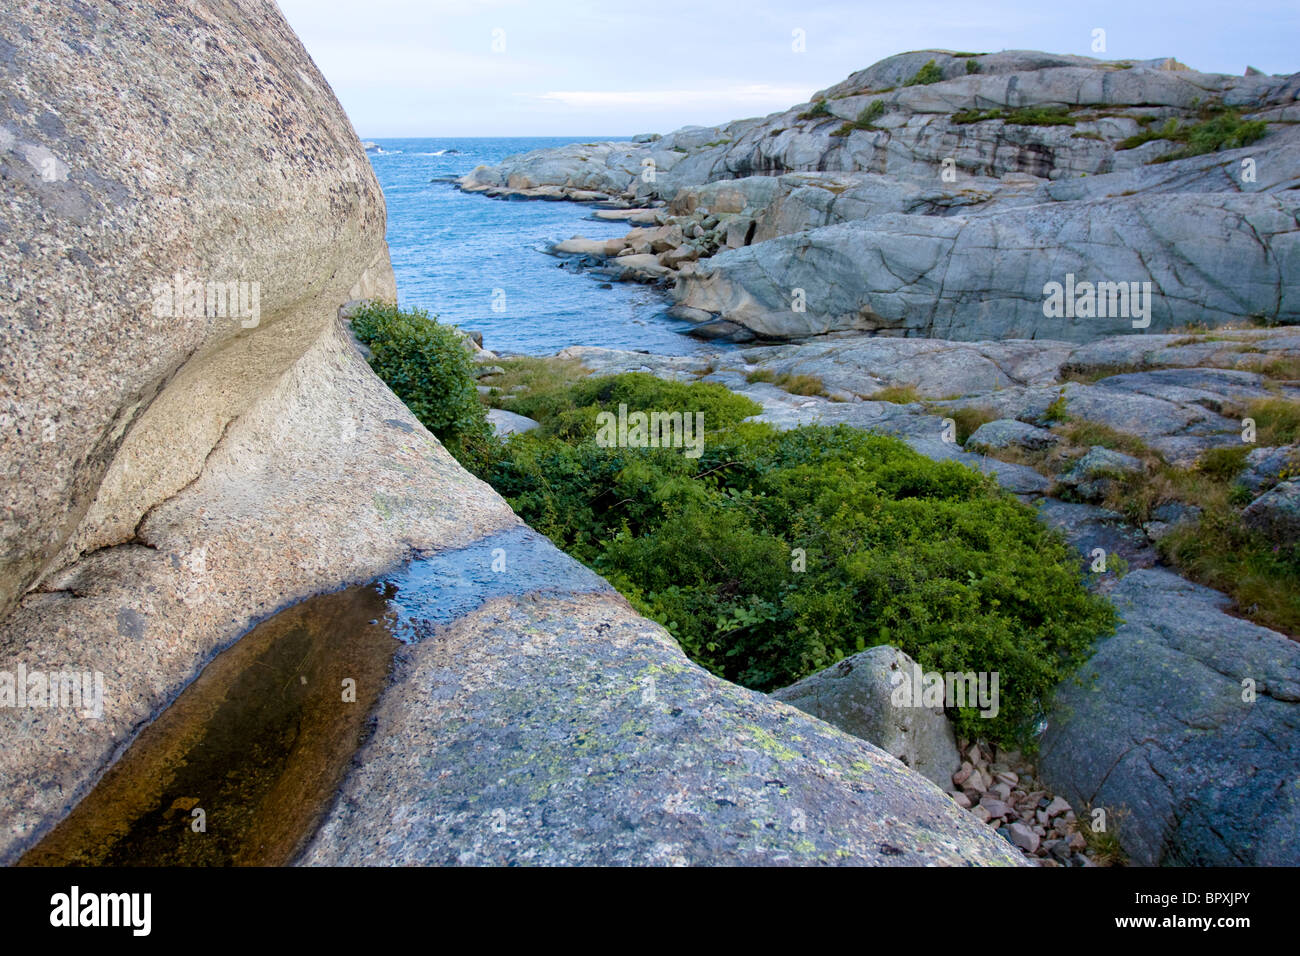 Rocky coastline with bushes at Verdens Ende, Tjome, Norway. Stock Photo